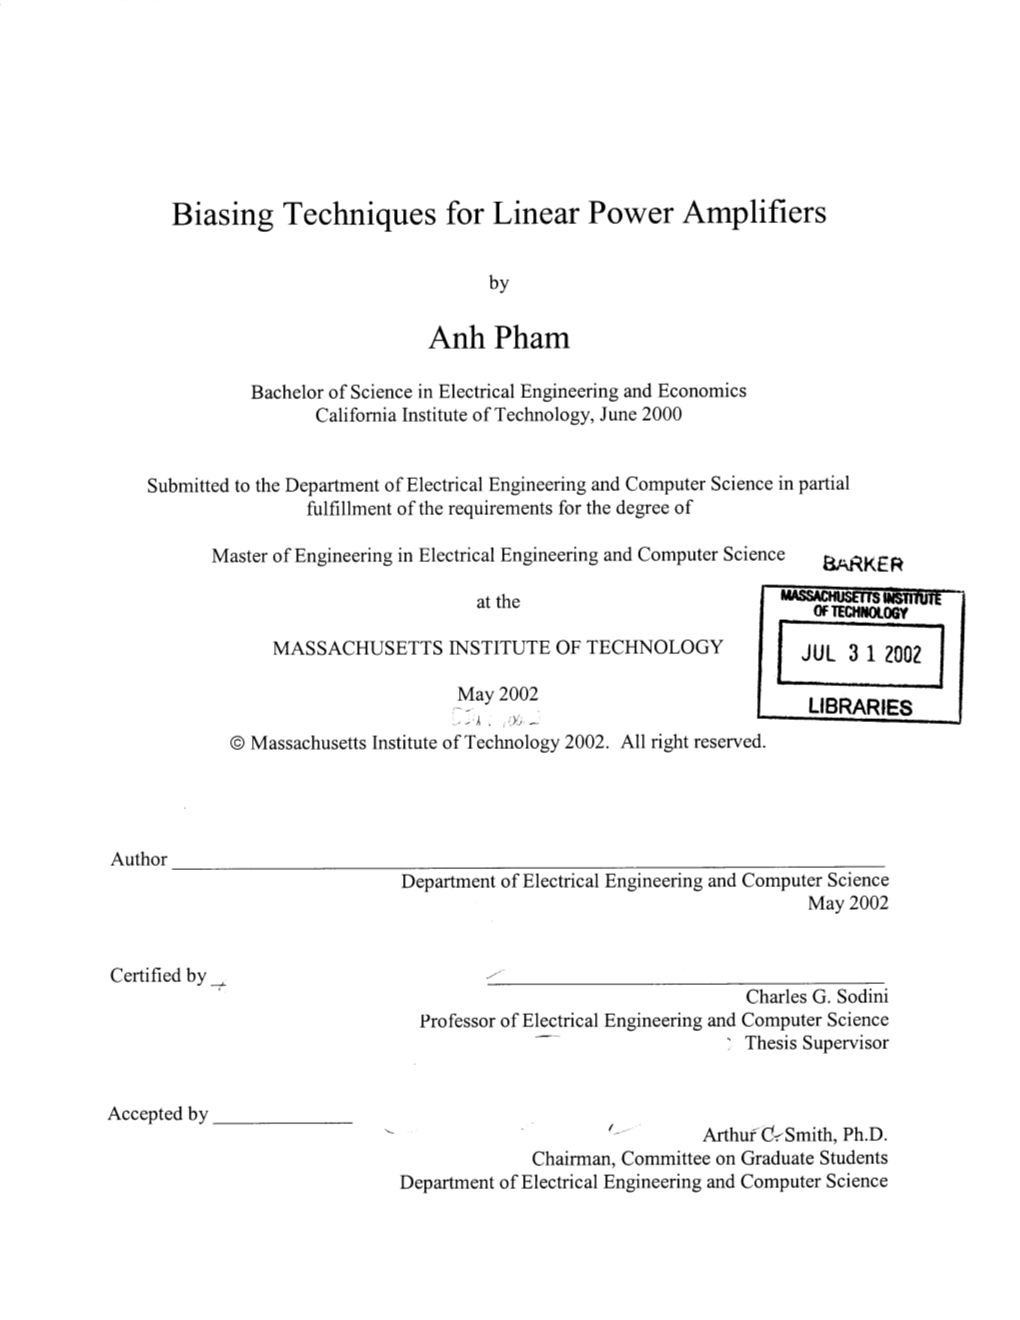 Biasing Techniques for Linear Power Amplifiers Anh Pham